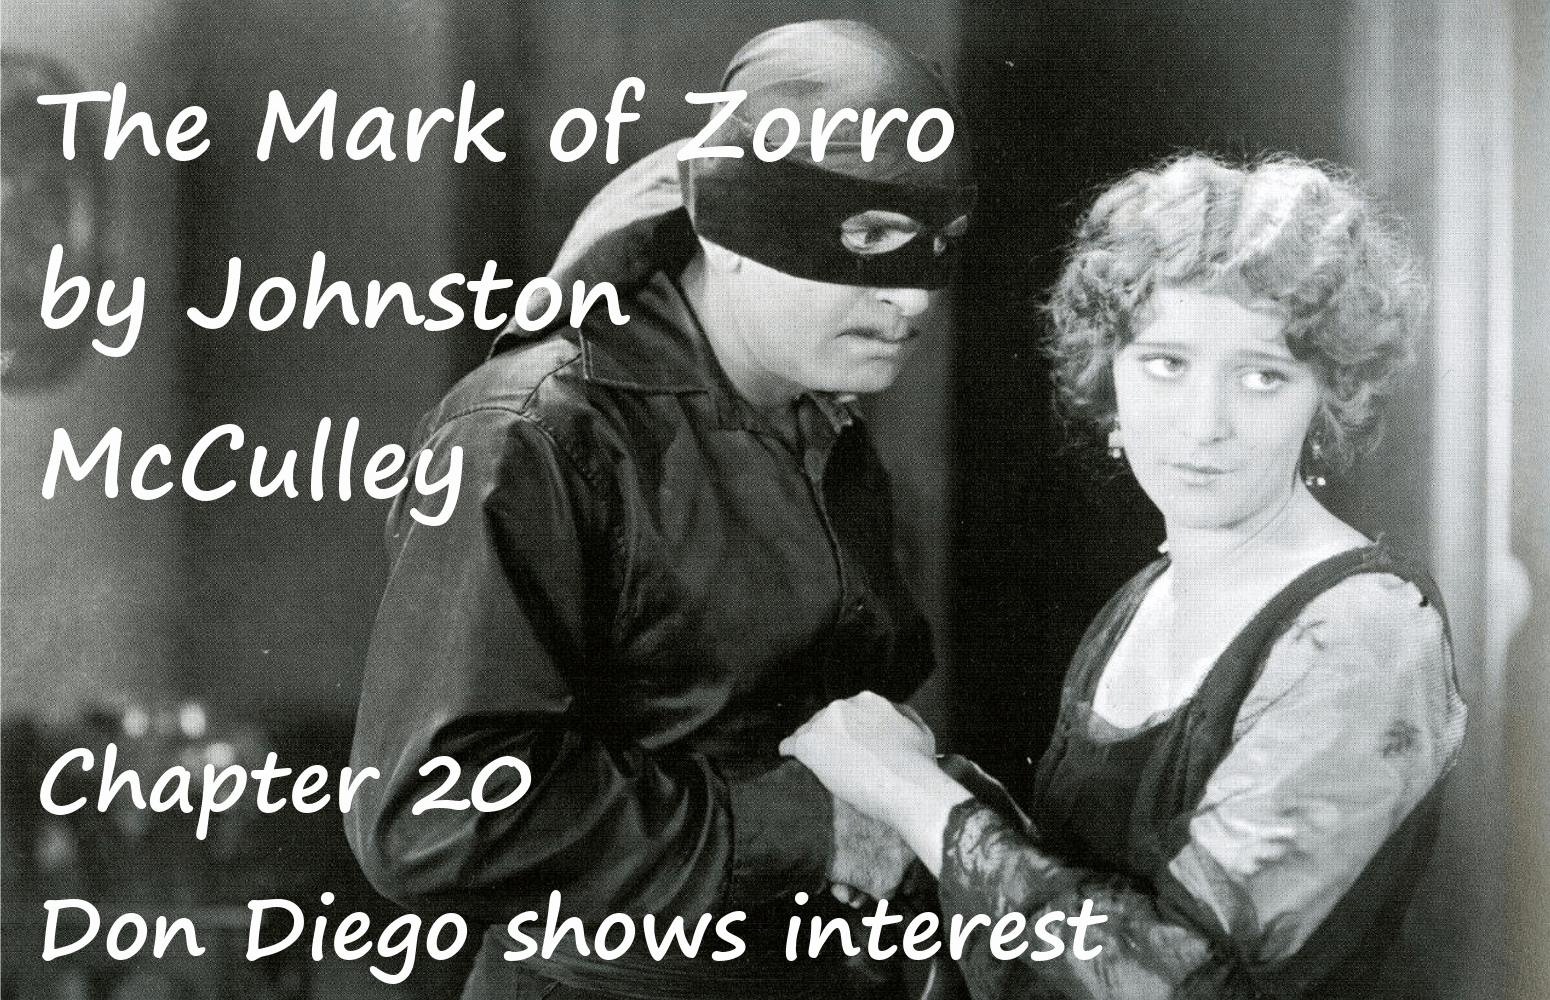 The Mark of Zorro chapter 20 Don Diego shows interest by Johnston McCulley